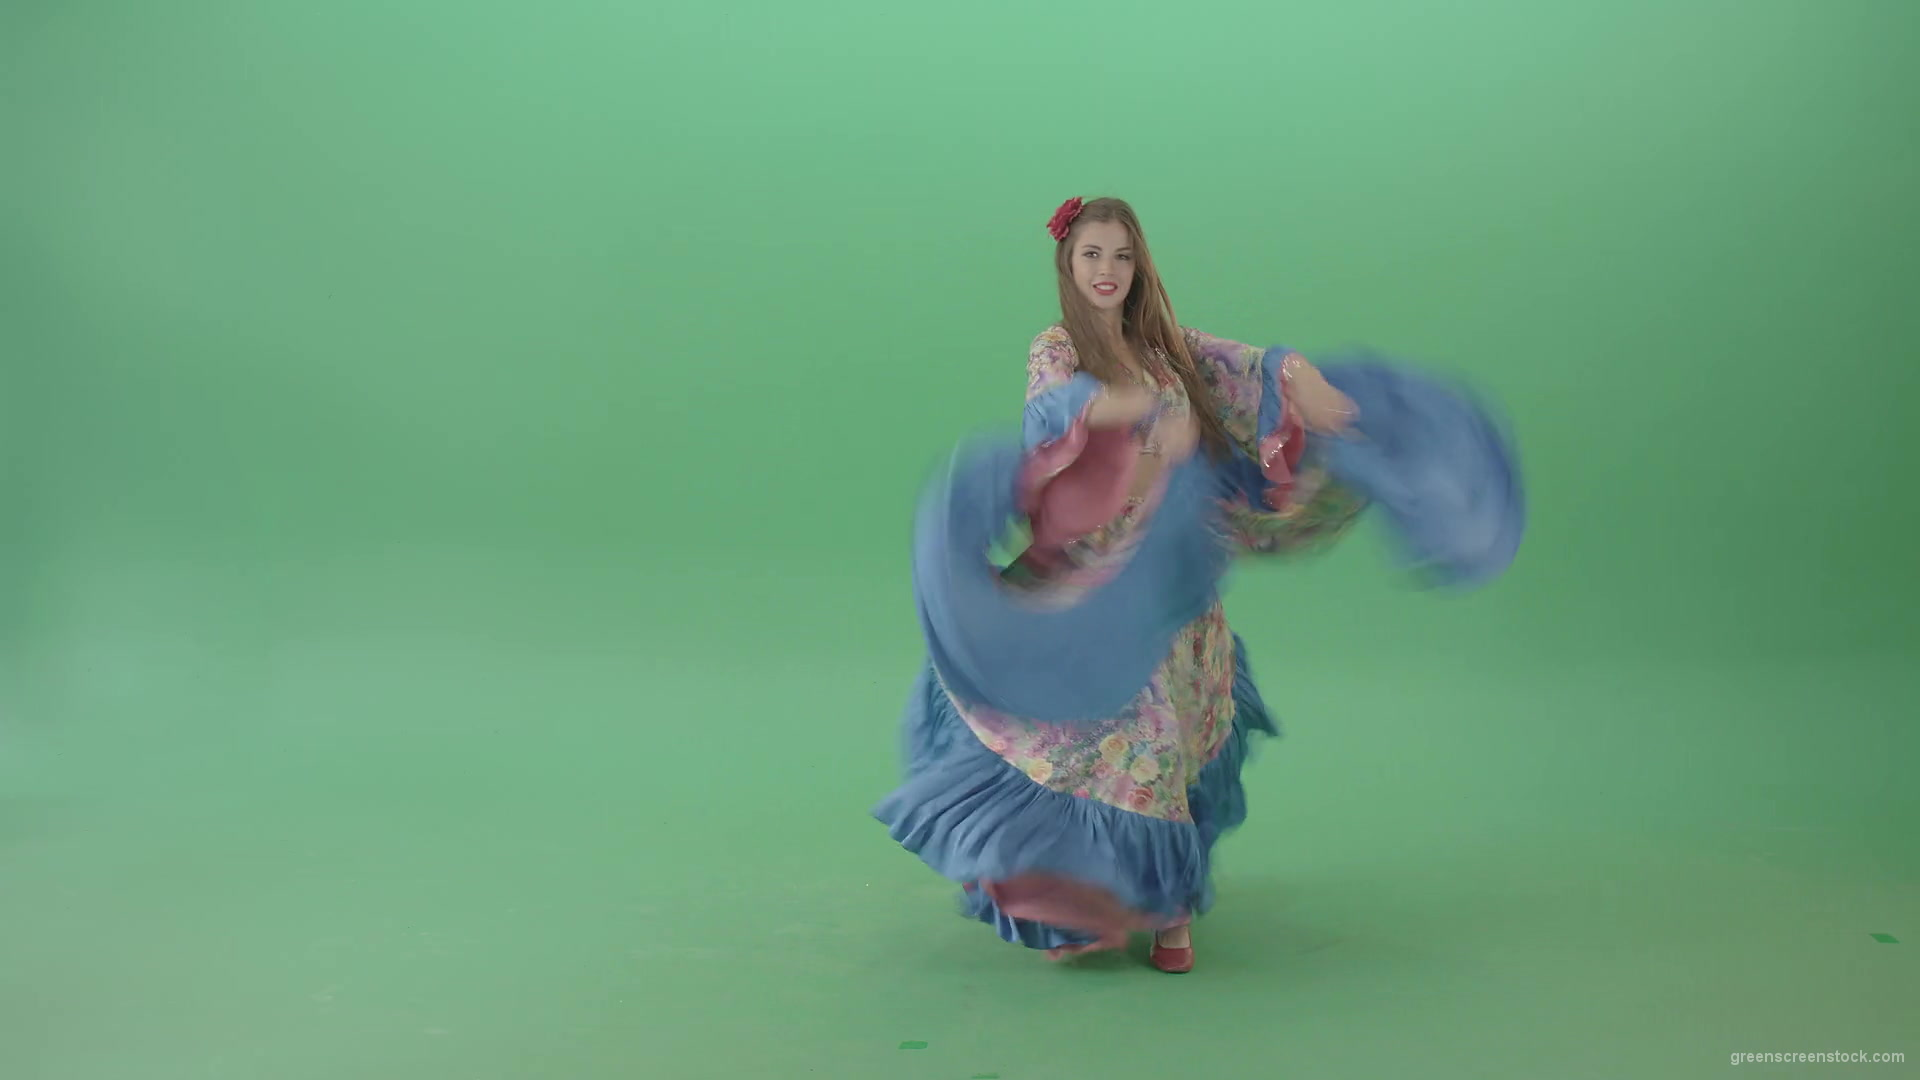 Balkan-roma-girl-waving-gypsy-dress-and-dancing-isolated-on-green-screen-4K-Video-Footage-1-1920_005 Green Screen Stock